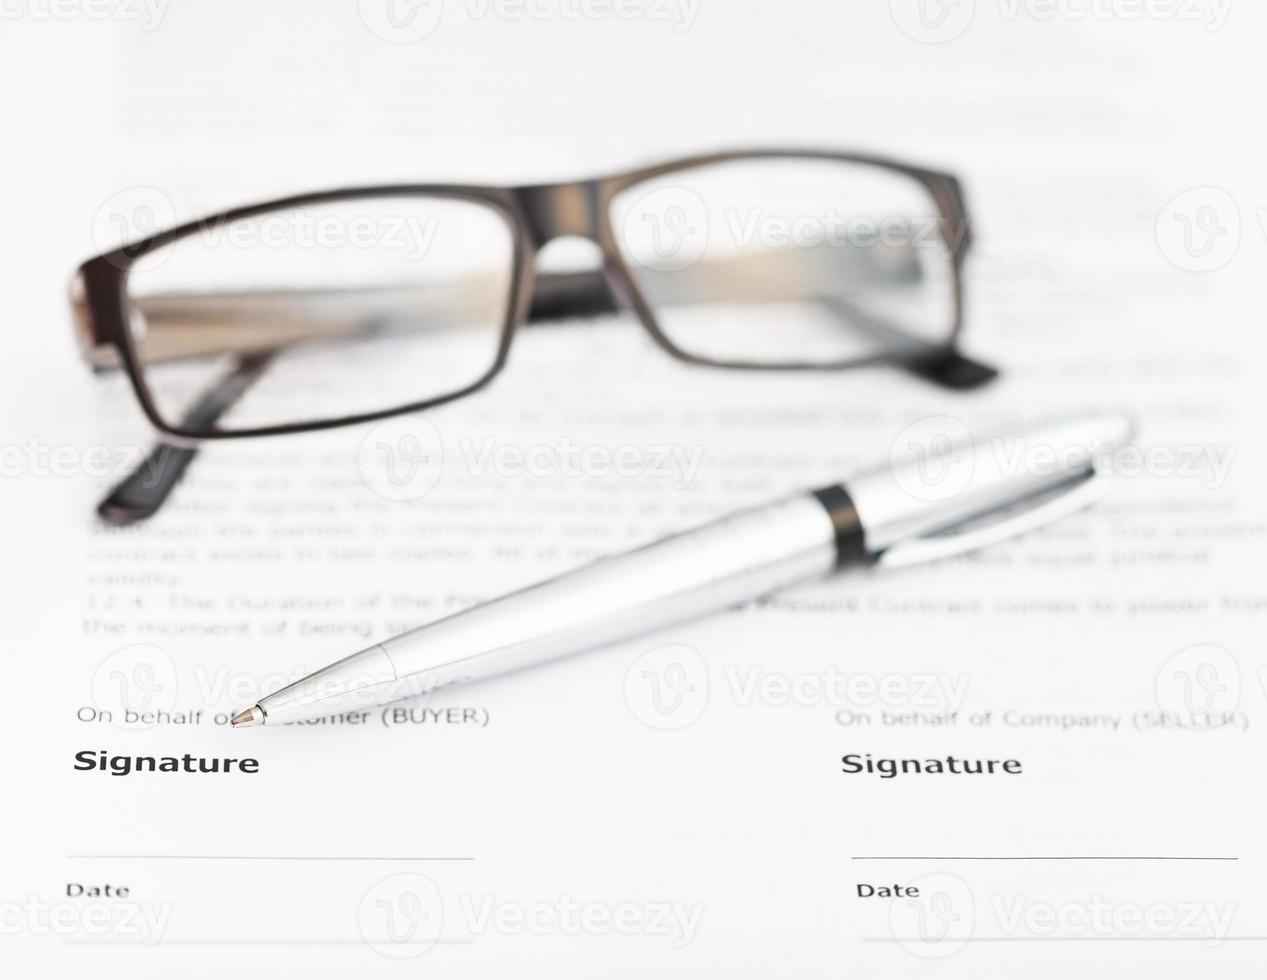 silver pen and eyeglasses on signature page photo